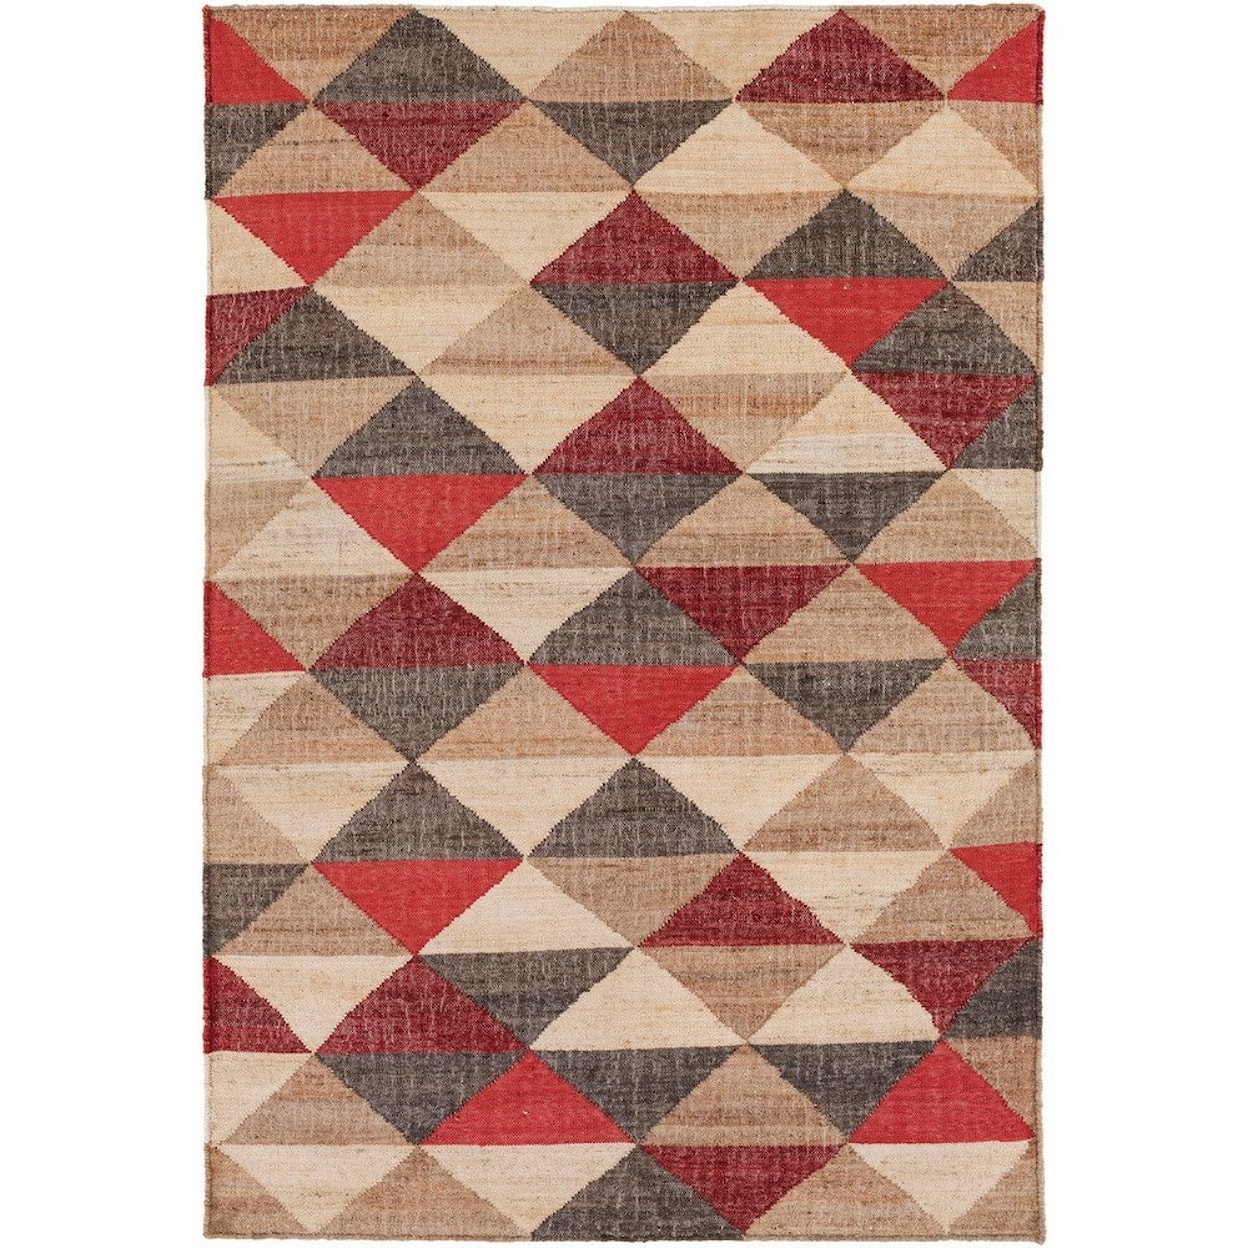 Ruby-Gordon Accents Seaport1 8' x 10' Rug